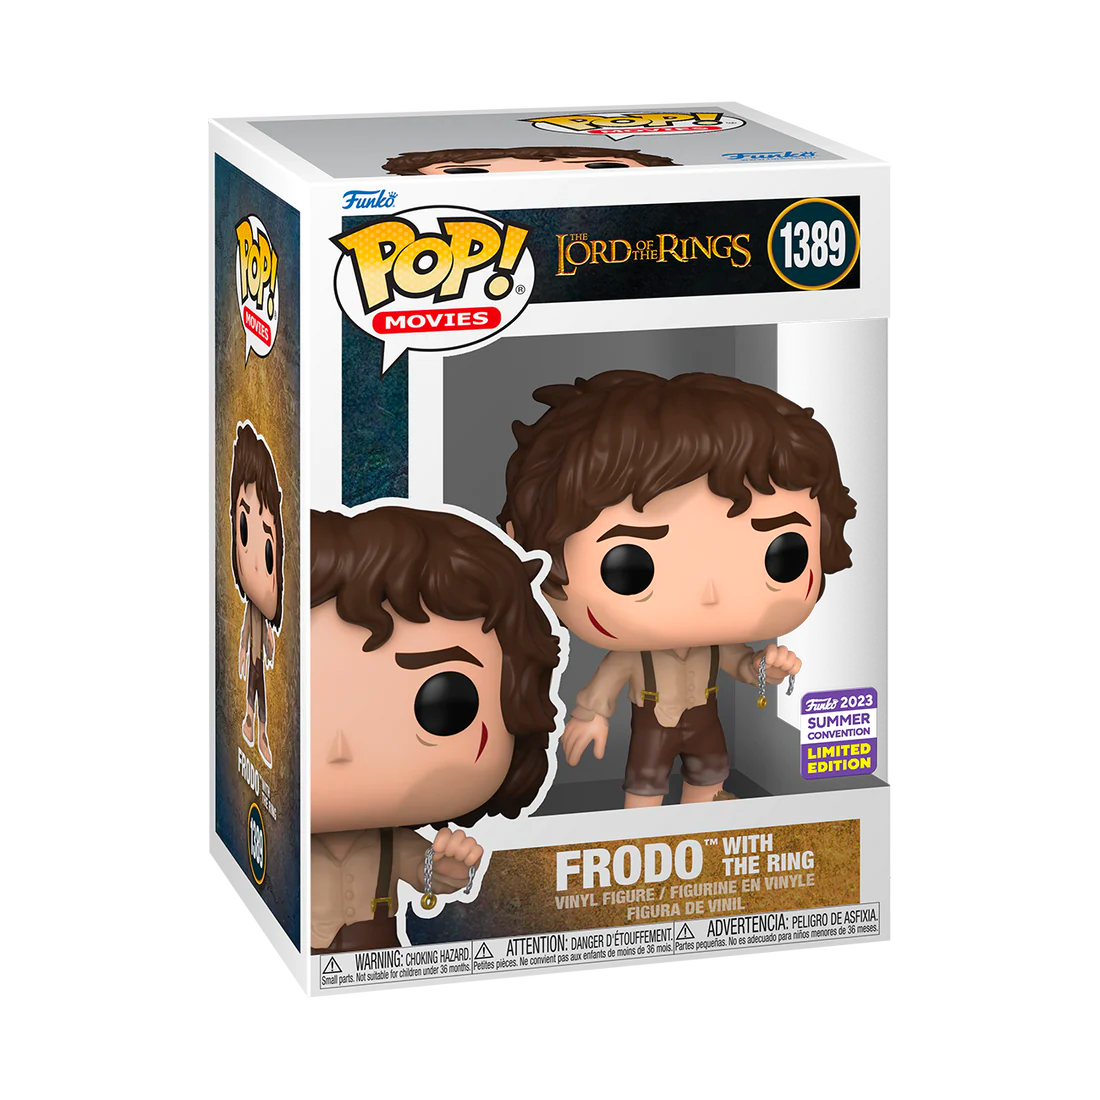 FRODO WITH THE RING SDCC 2023 CONVENTION EXCLUSIVE FUNKO POP MOVIES LOTR LORD OF THE RINGS #1389 PRE ORDER